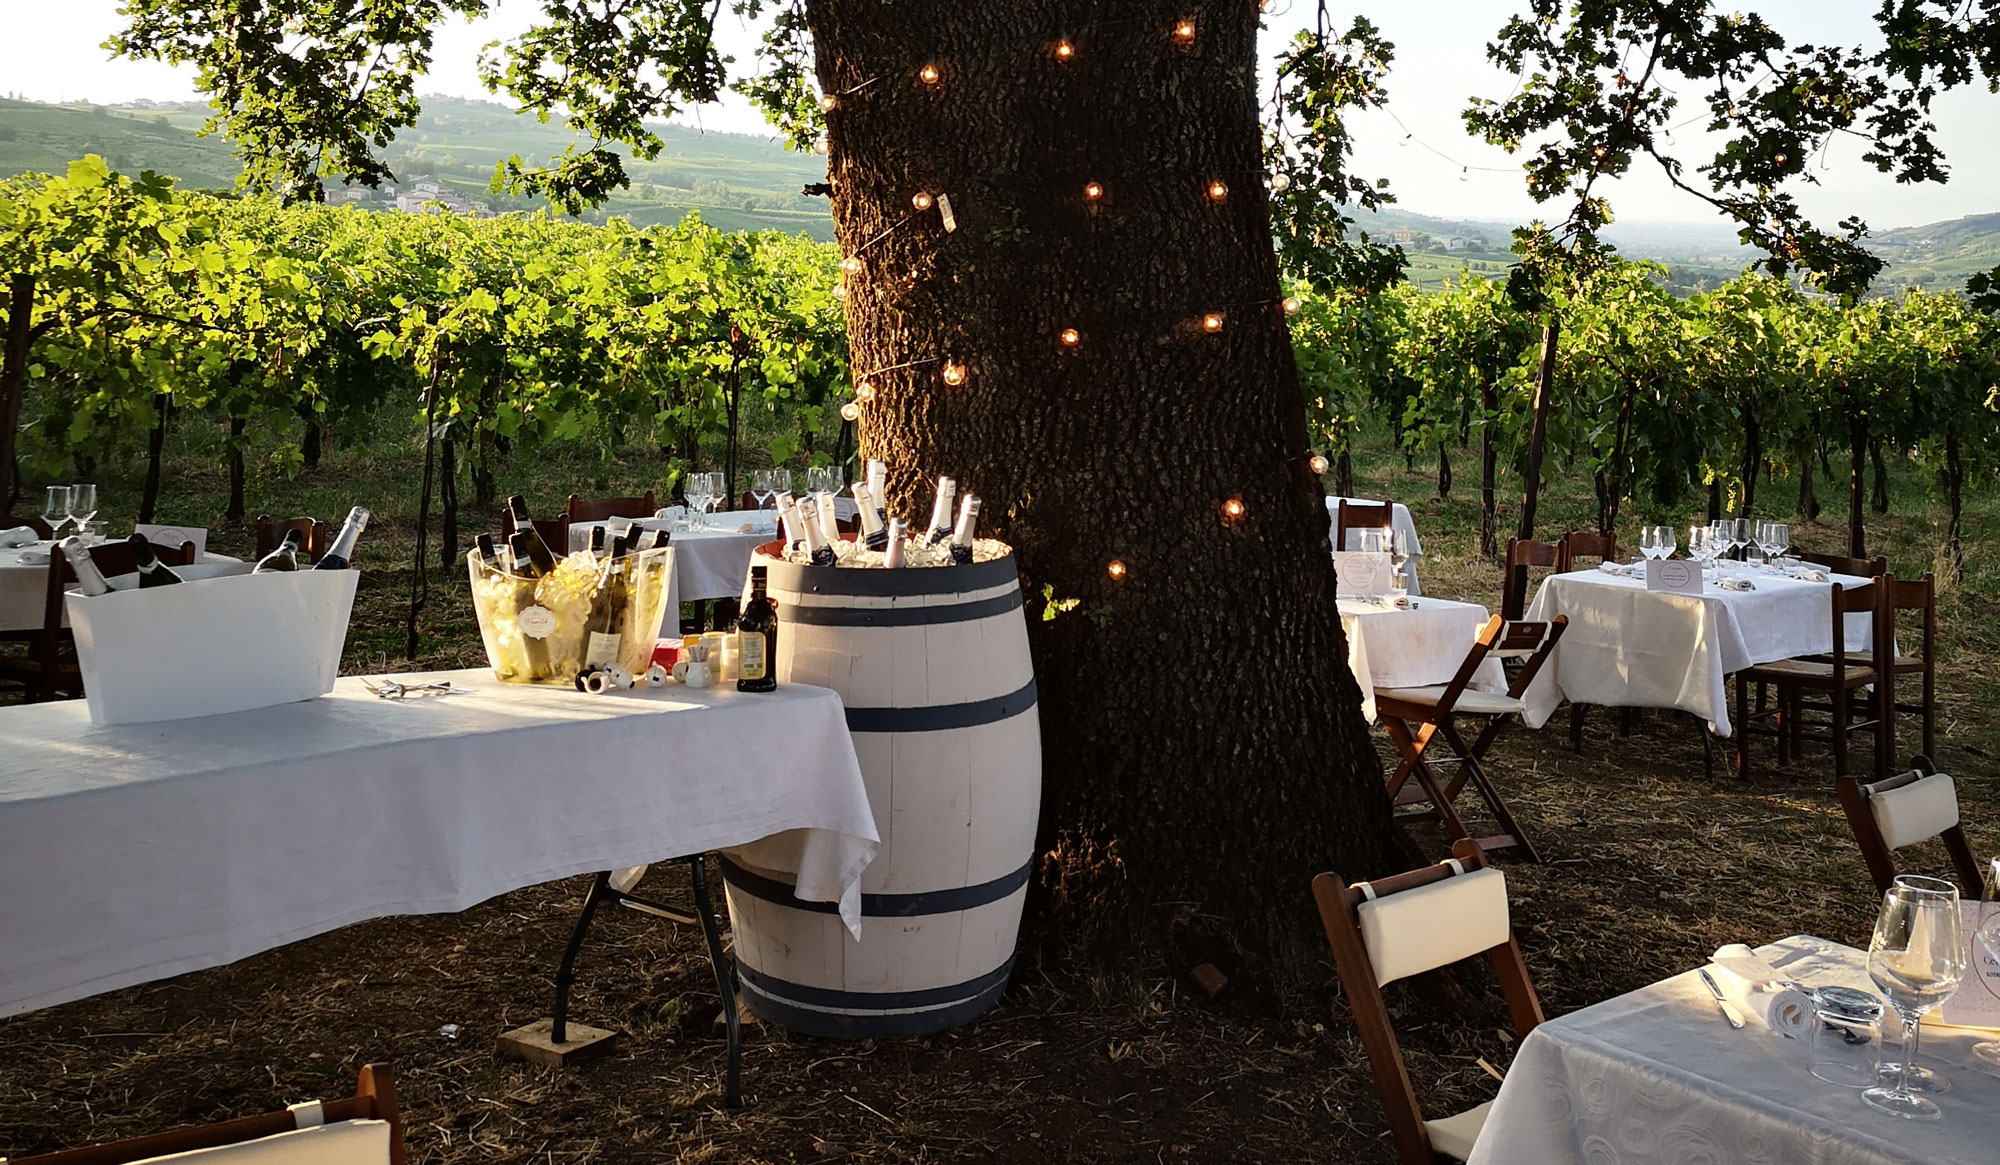 Dinner among vineyard rows in the Oltrepò